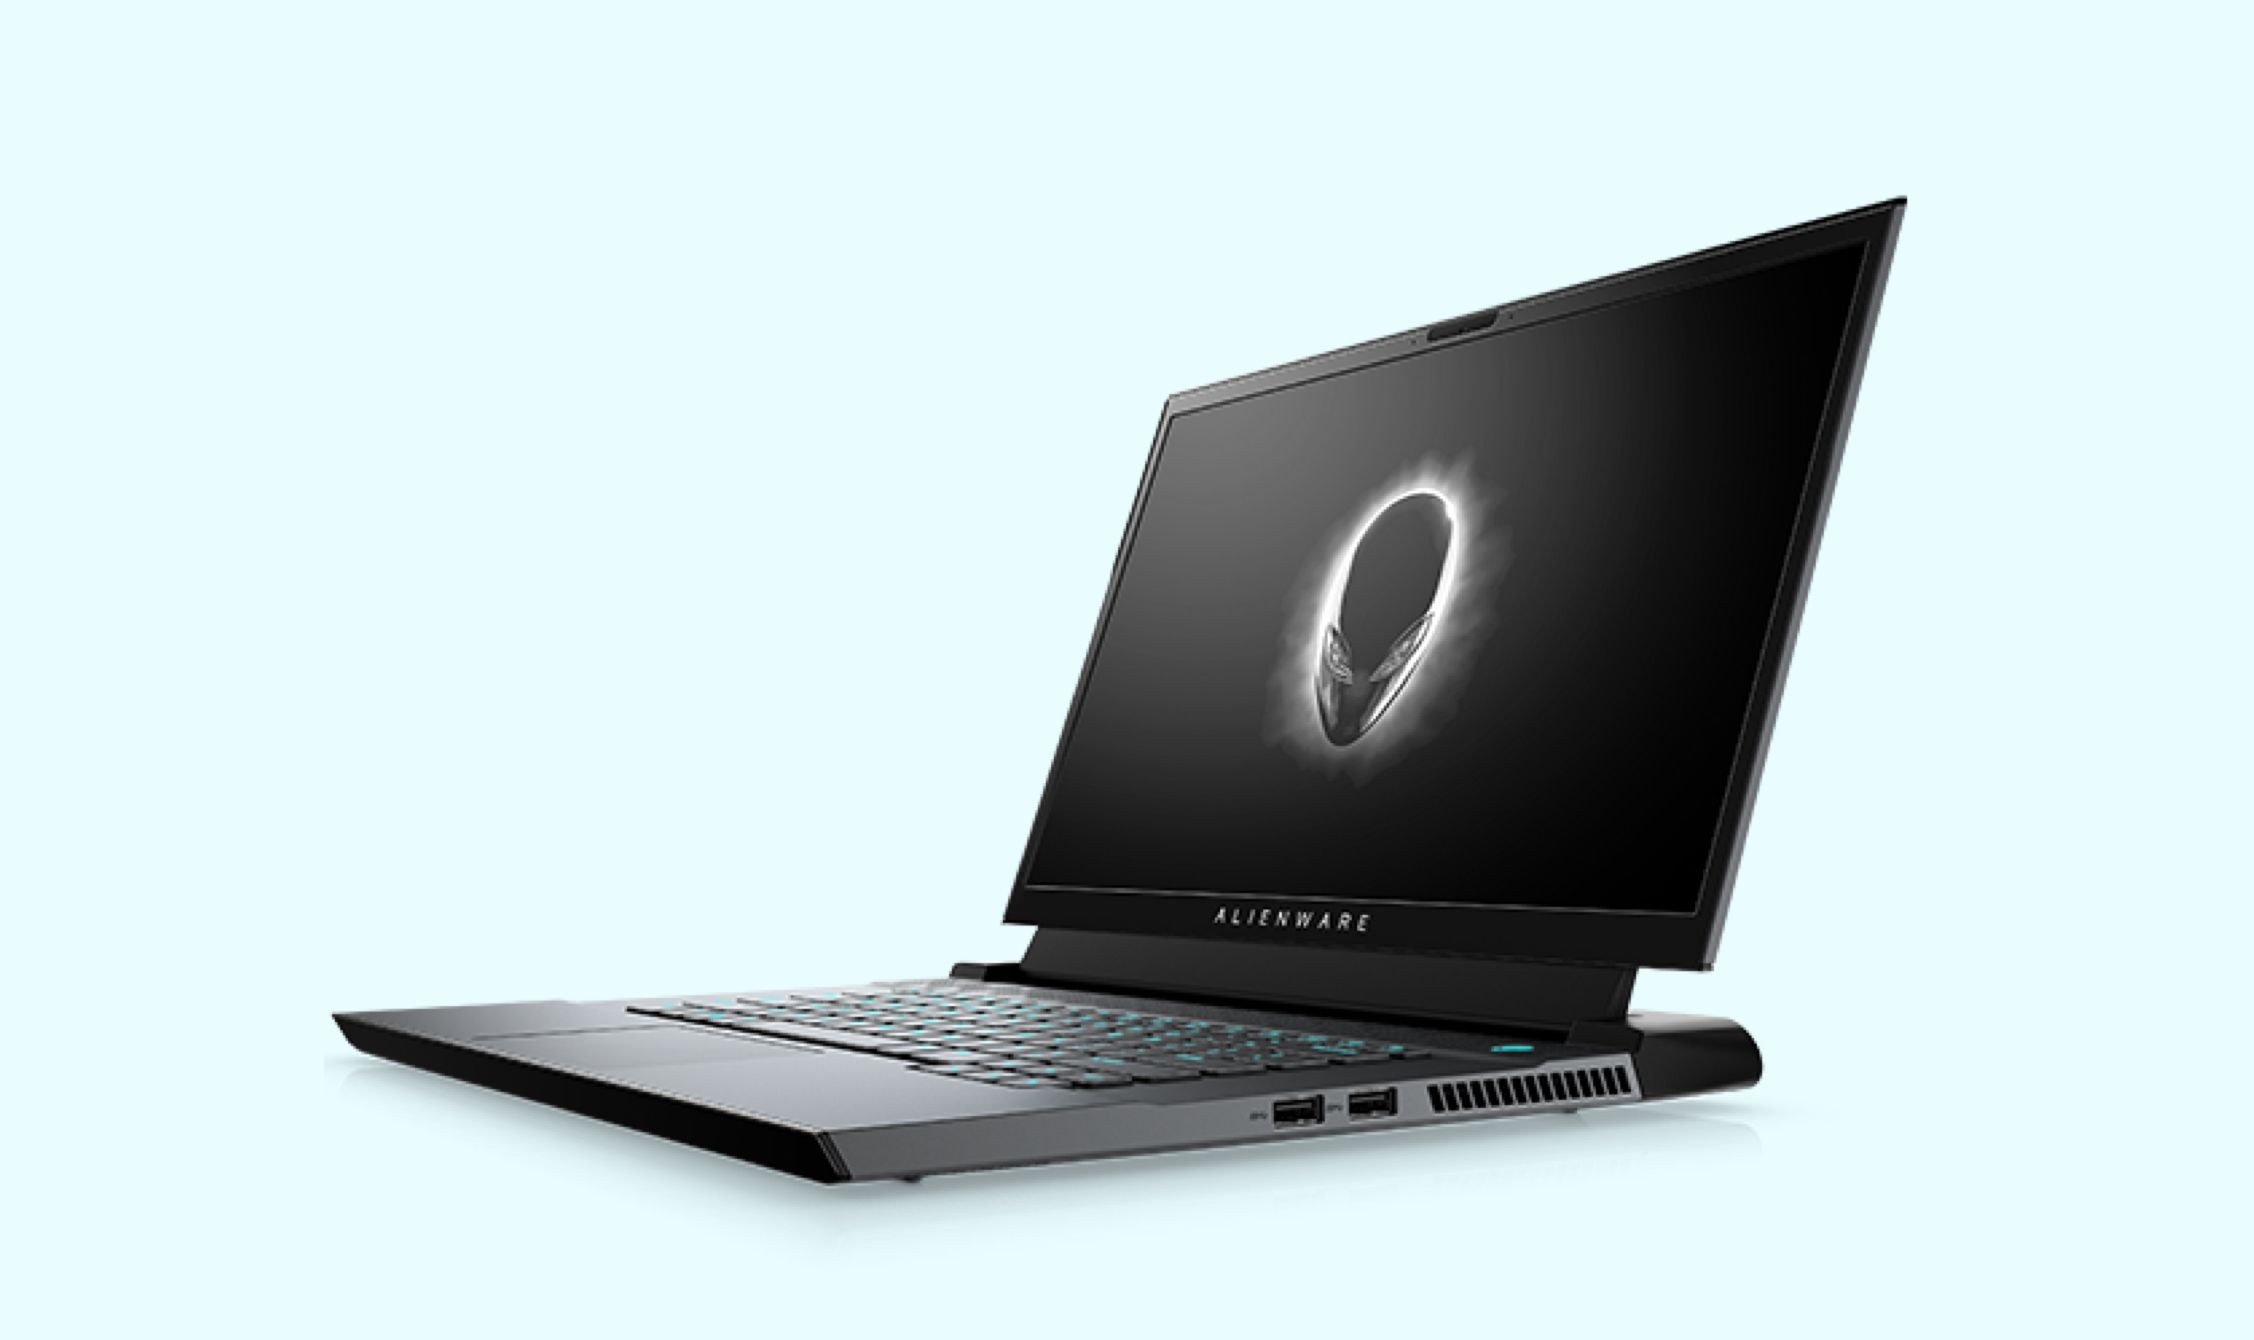 Win a free Alienware M15 Gaming Laptop